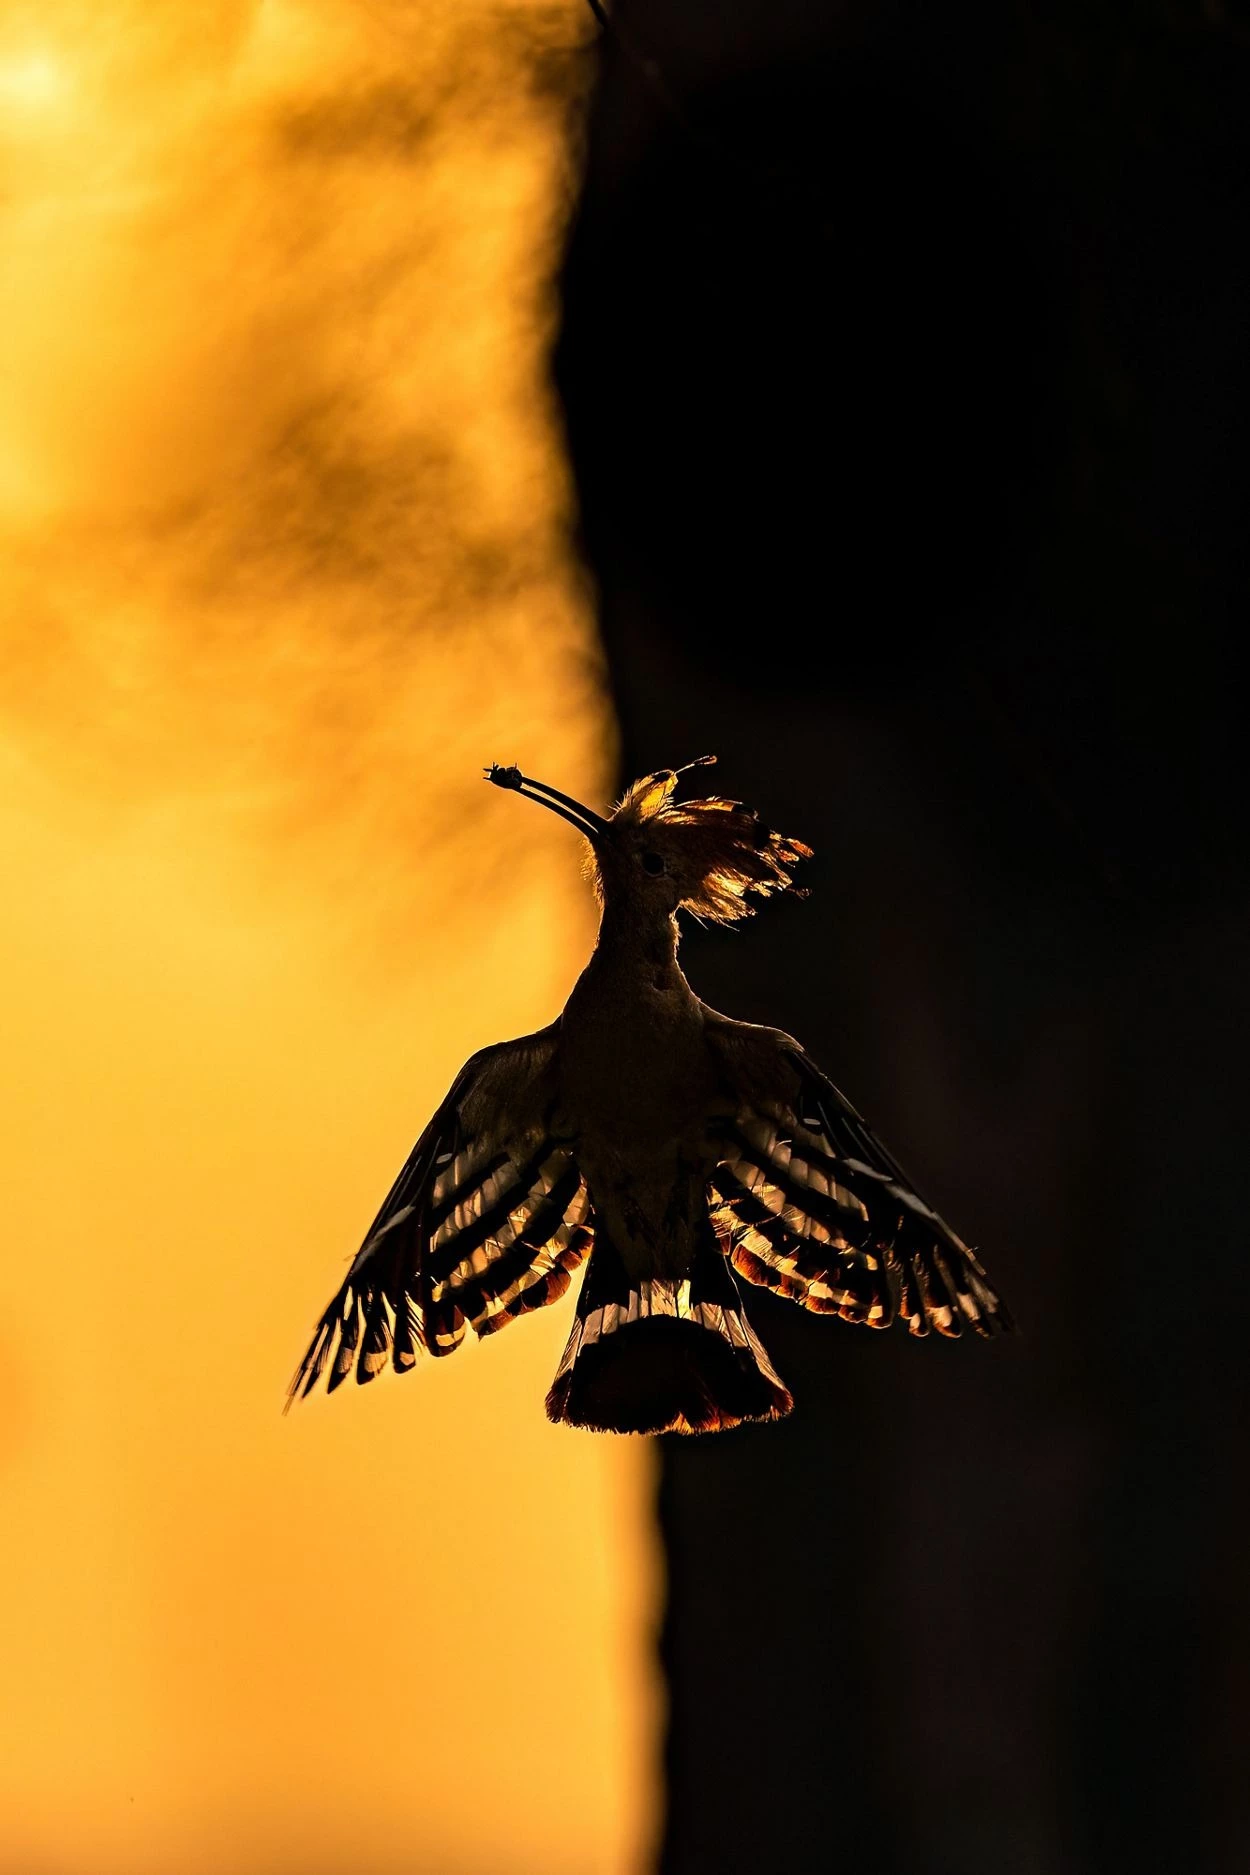 Dawn's whispers: Graceful hoopoe silhouette at sunrise - Celebrity Judge Choice